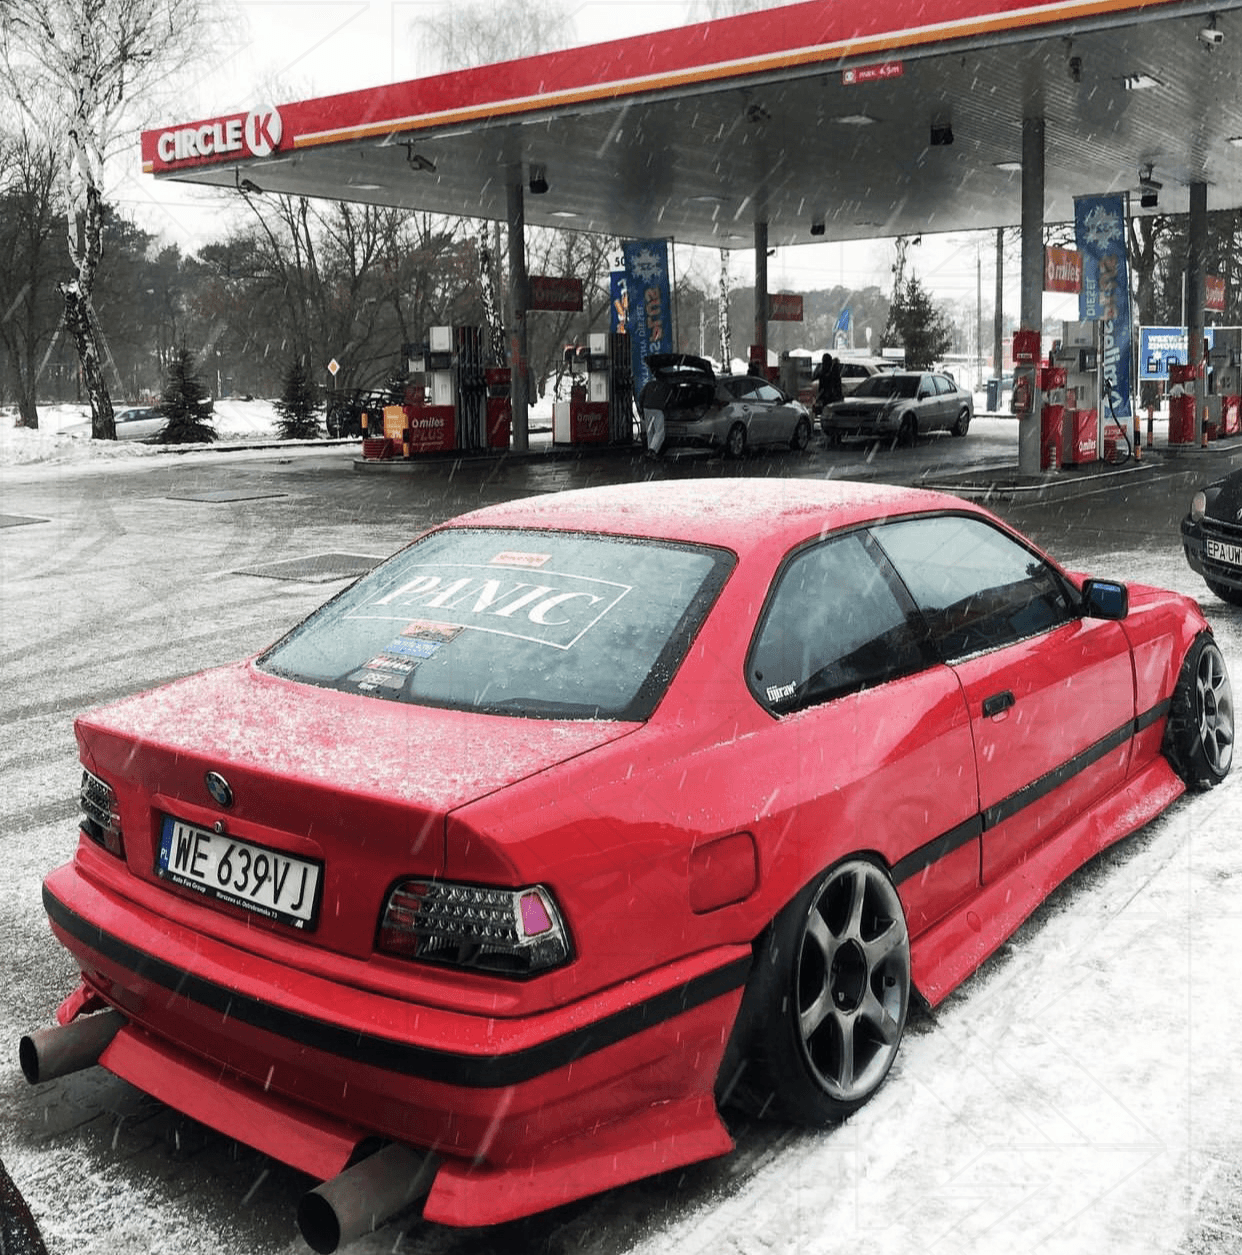 E36 Coupe/Convertible LED Altezza Style Tail Lights - K2 Industries